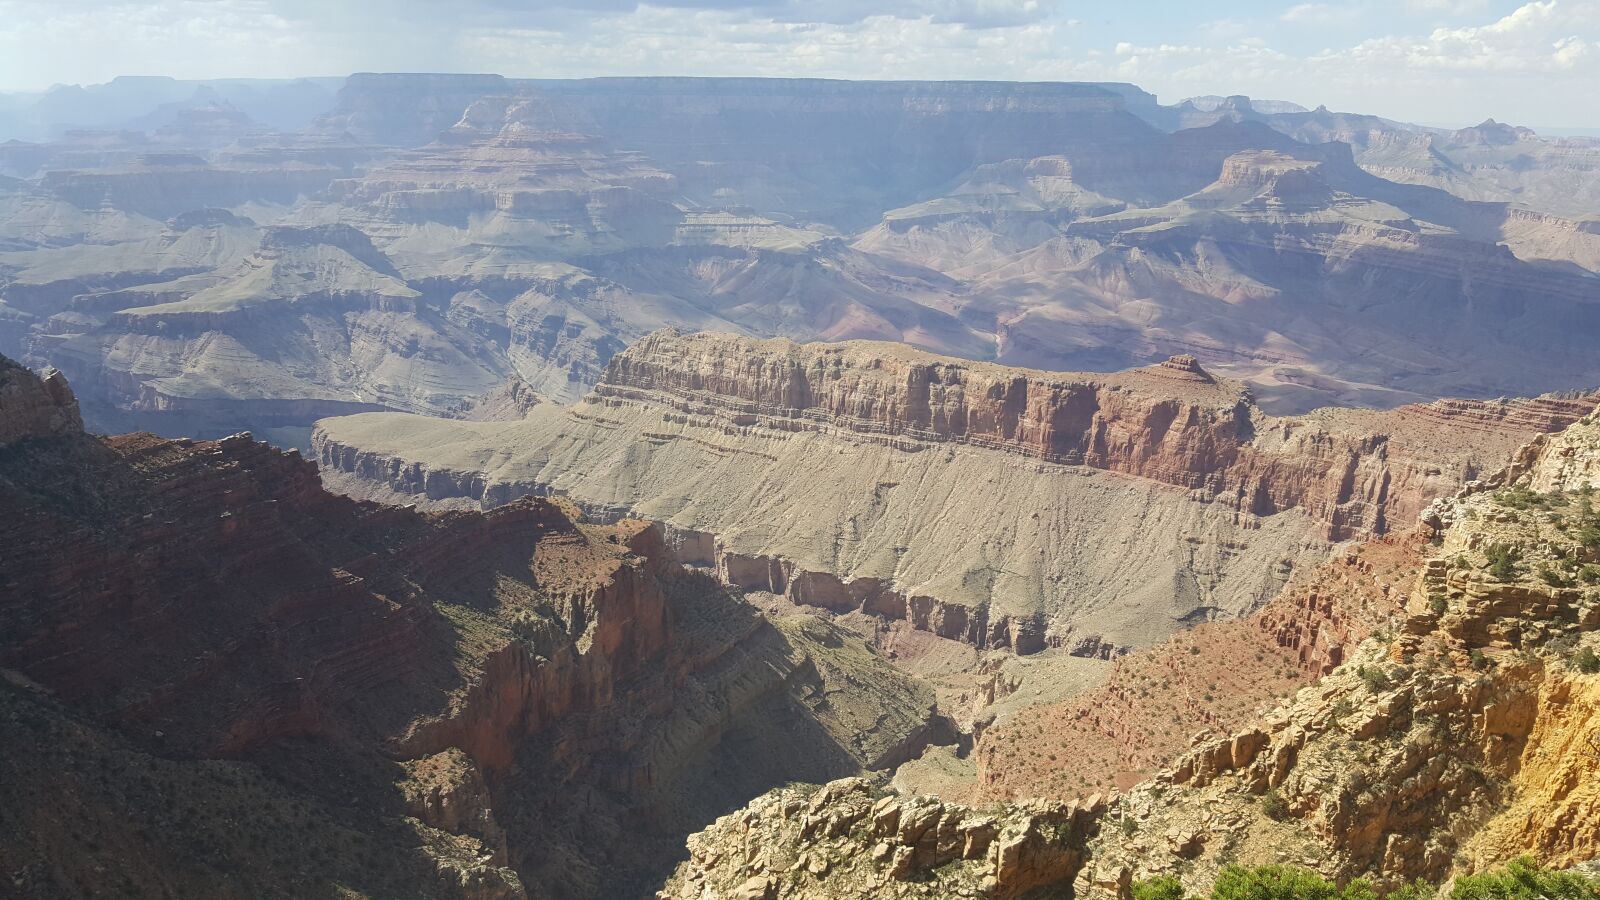 Samsung Galaxy S6 sample photo. Grand canyon, view, landscape photography